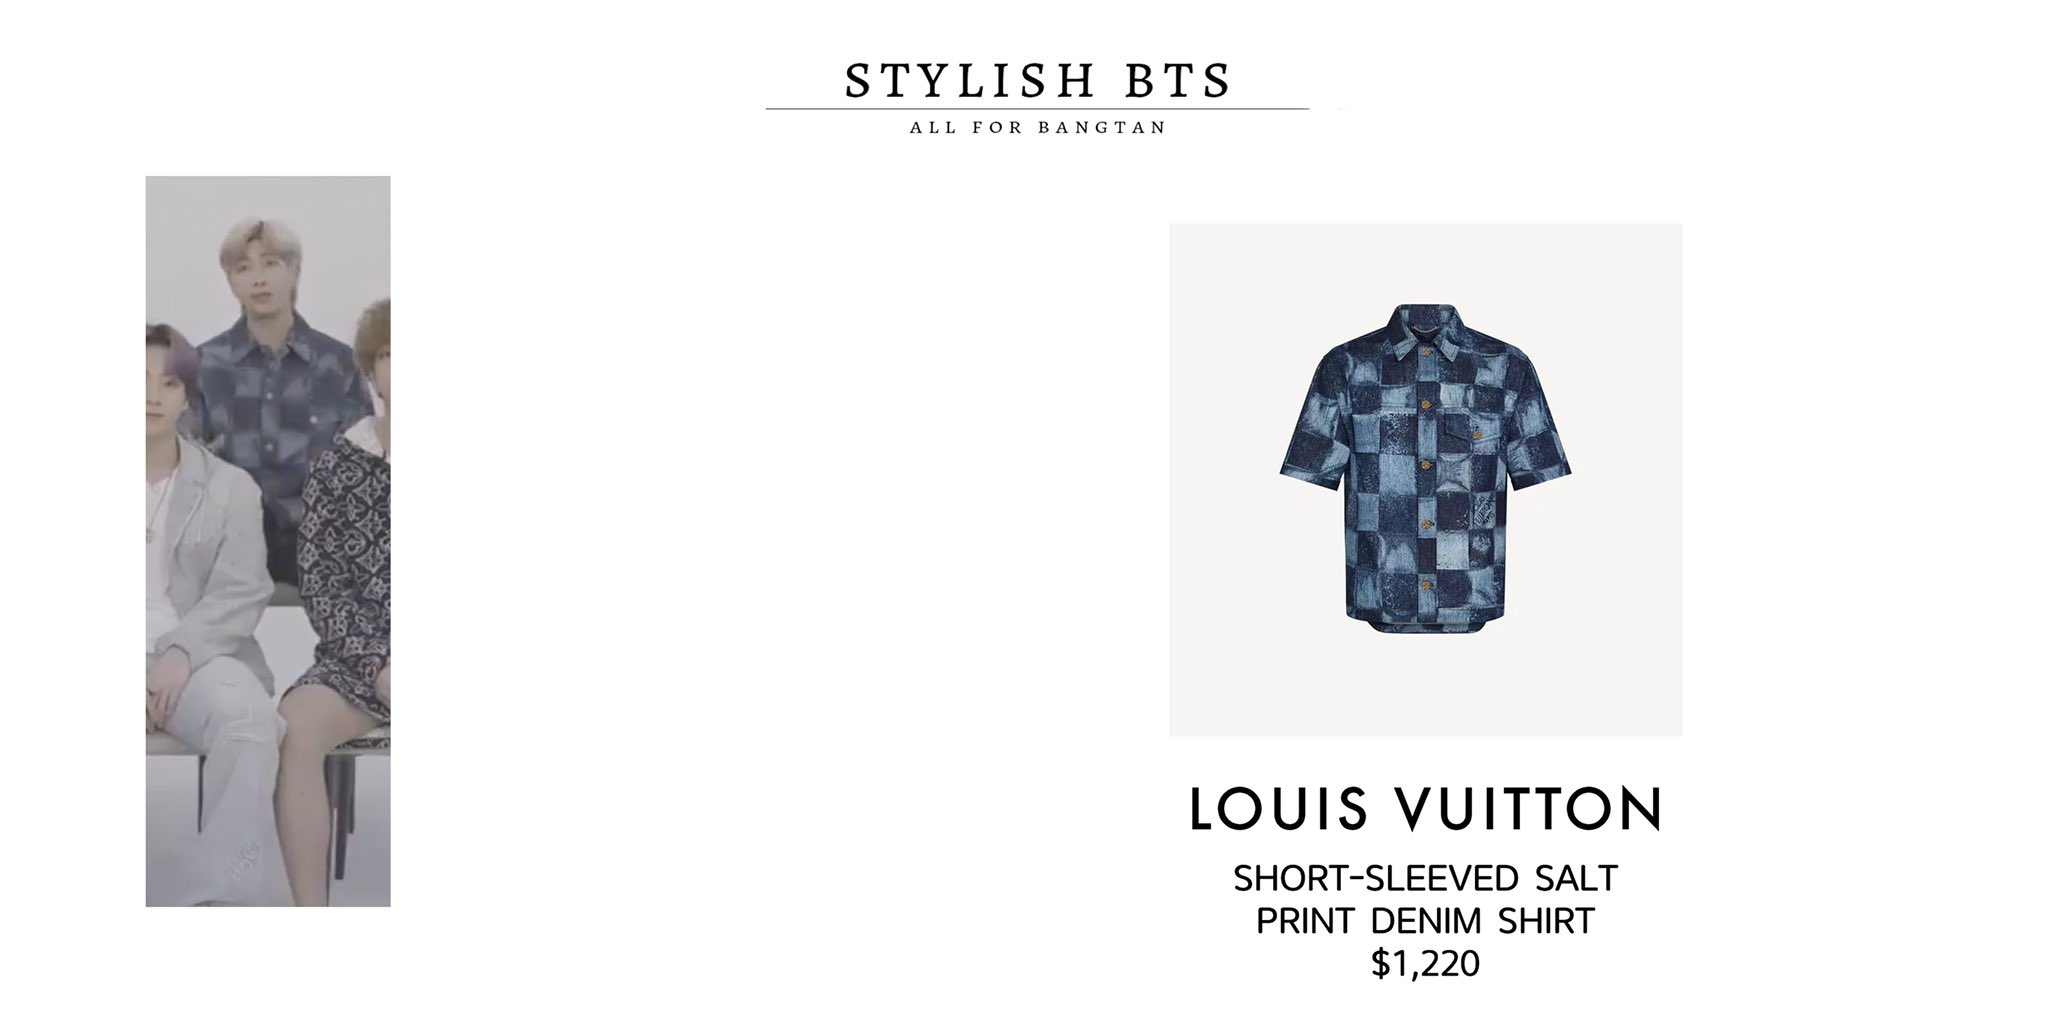 Bangtan Style⁷ (slow) on X: BTS at The Late Show with Stephen Colbert [Louis  Vuitton, Chanel, Rolex] #JUNGKOOK #V #JIMIN #JHOPE #BTS #BTSonLSSC @BTS_twt   / X